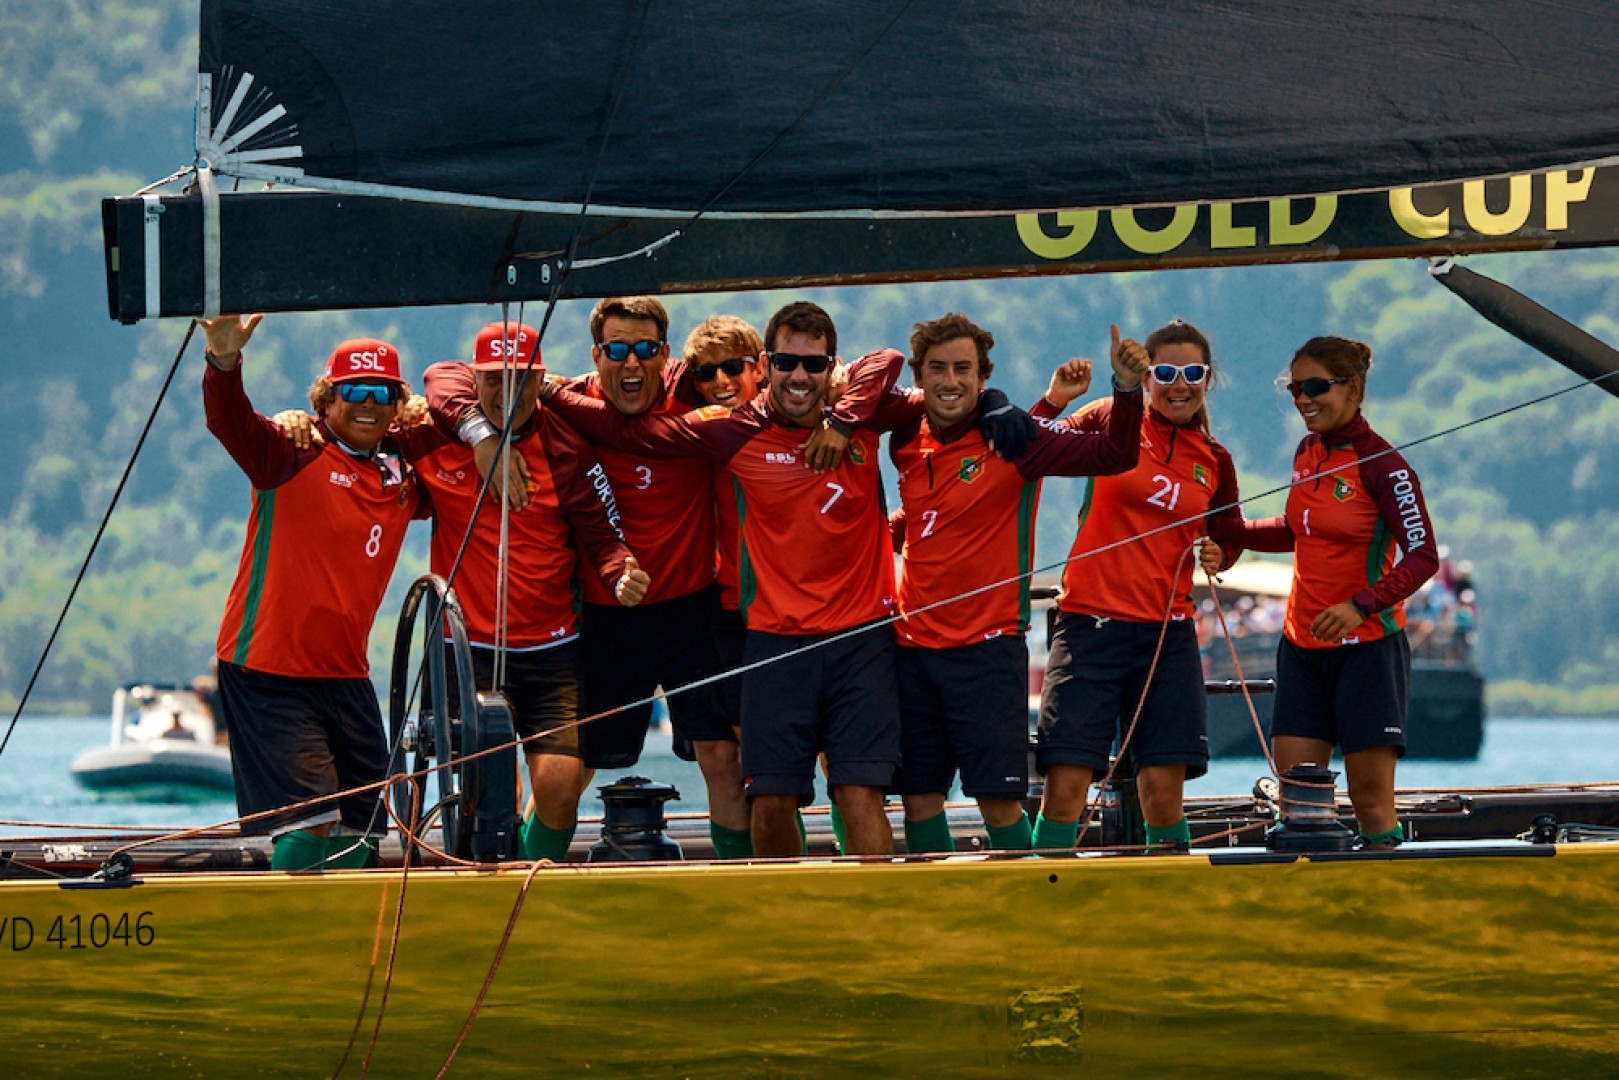 SSL Gold Cup: Peru, Chile, Portugal and the Czechs go through finals